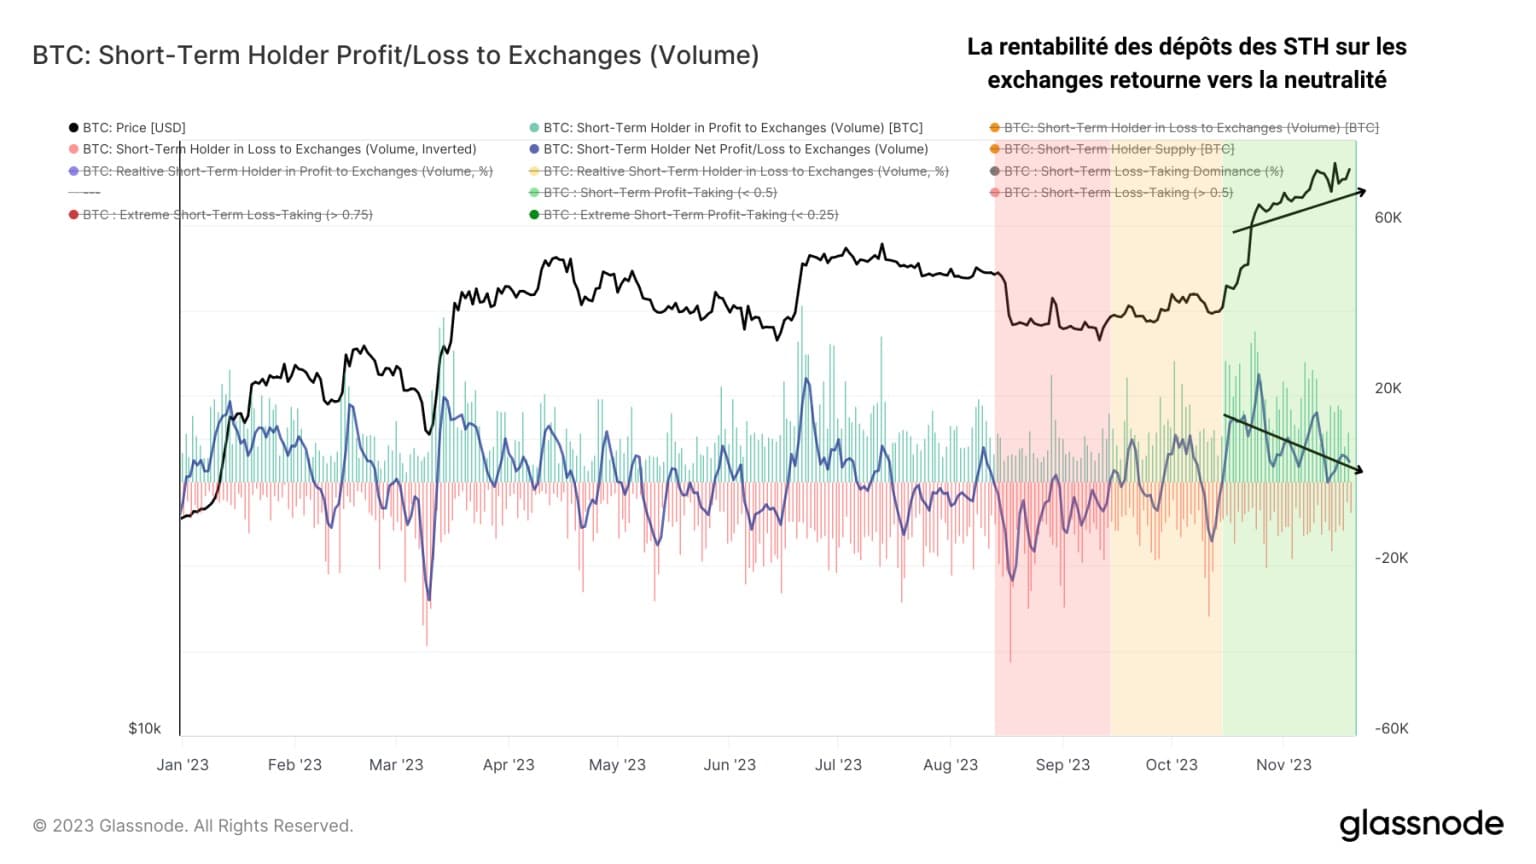 Figure 5: STH profit/loss deposits on exchanges